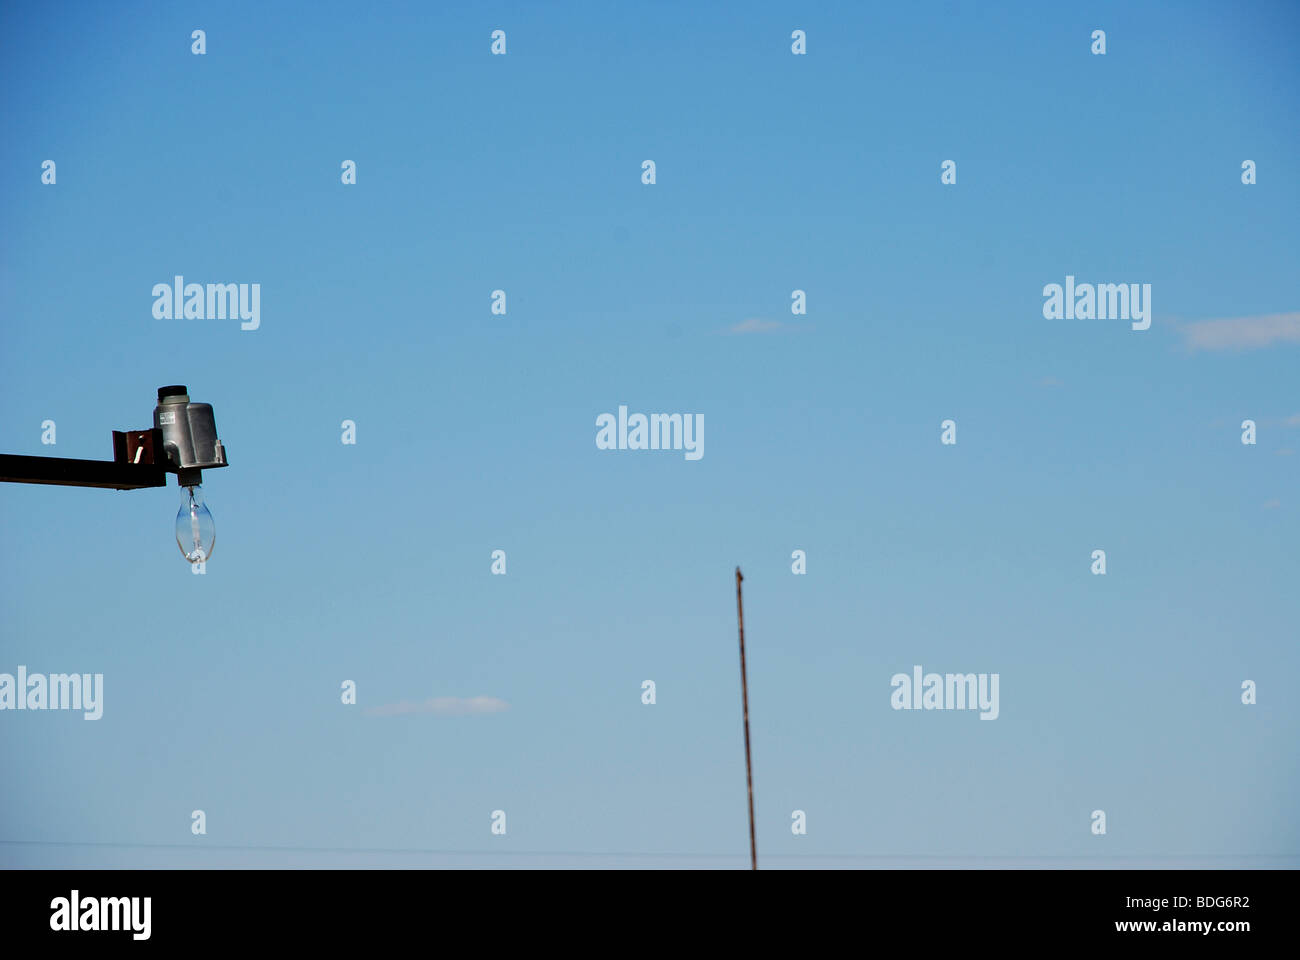 Light bulb against clear blue sky with pole in background Stock Photo